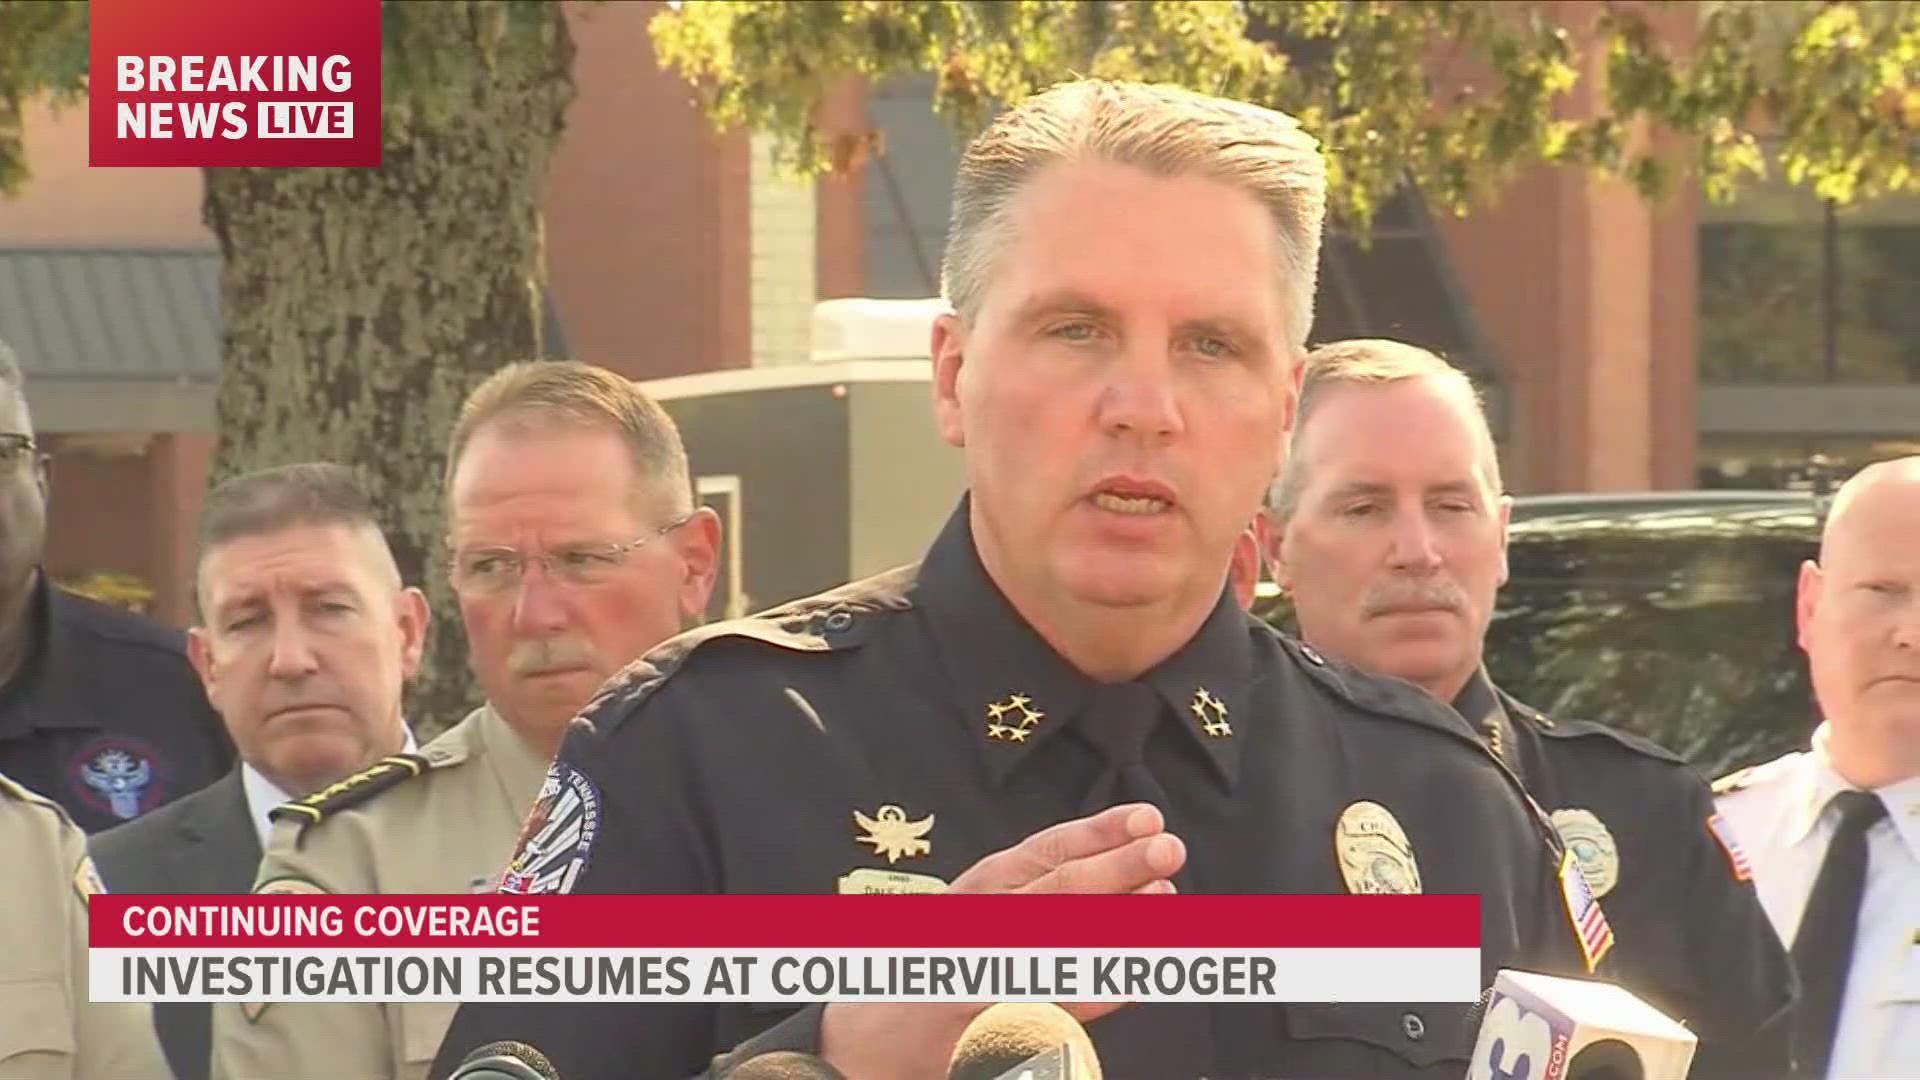 Collierville Police Chief Dale Lane provided an update Friday morning on the Kroger shooting that left 15 people injured and the shooter dead.